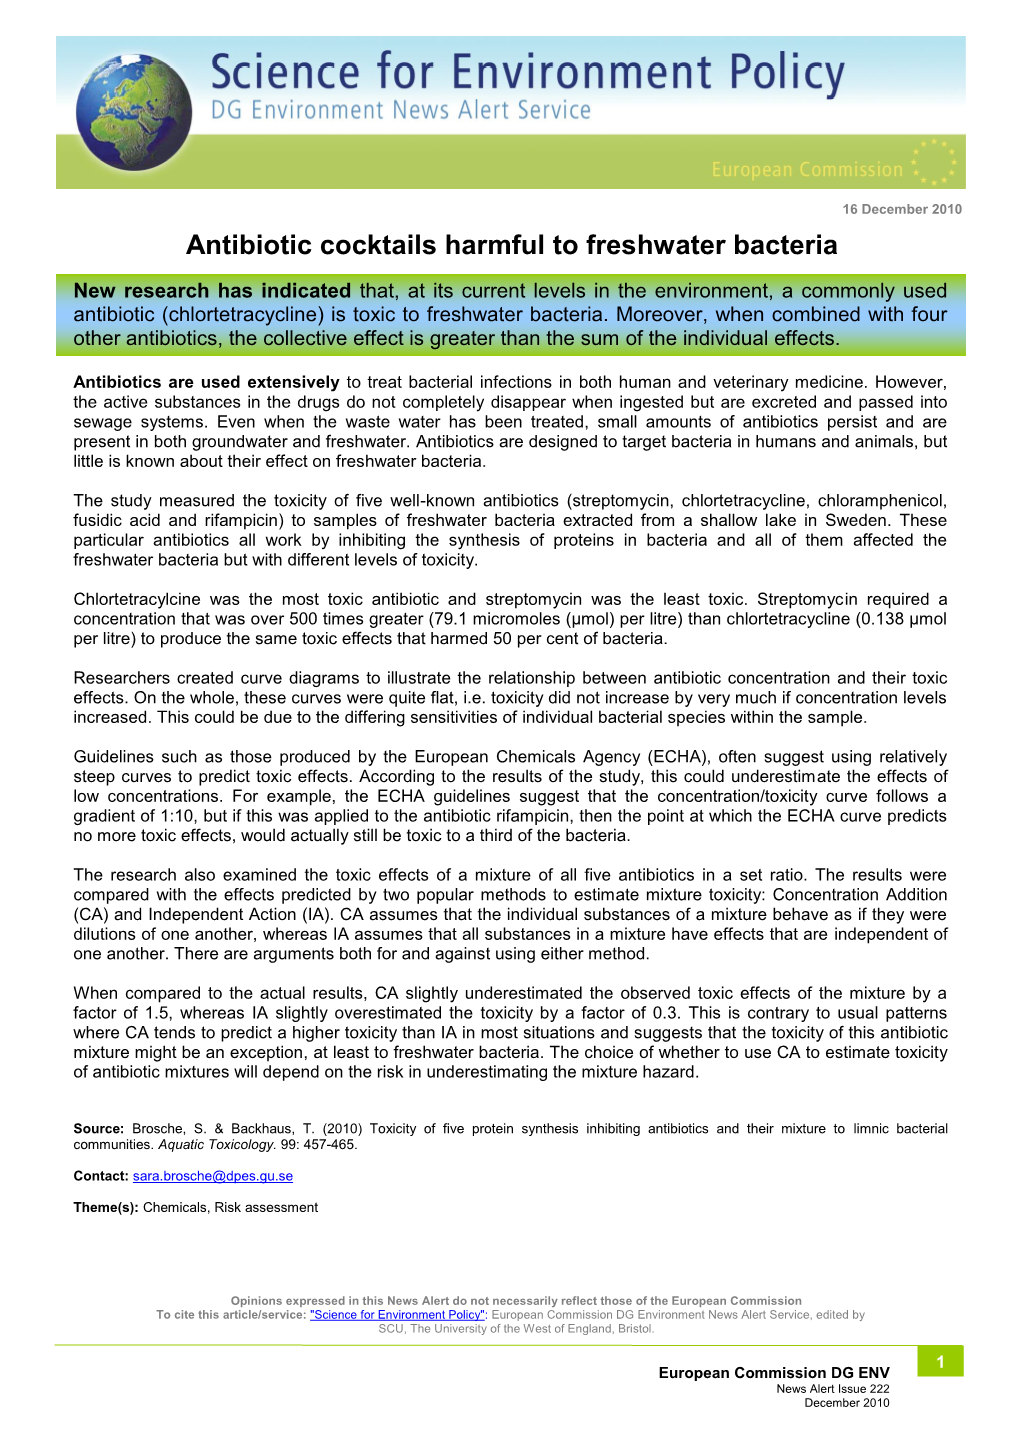 Antibiotic Cocktails Harmful to Freshwater Bacteria